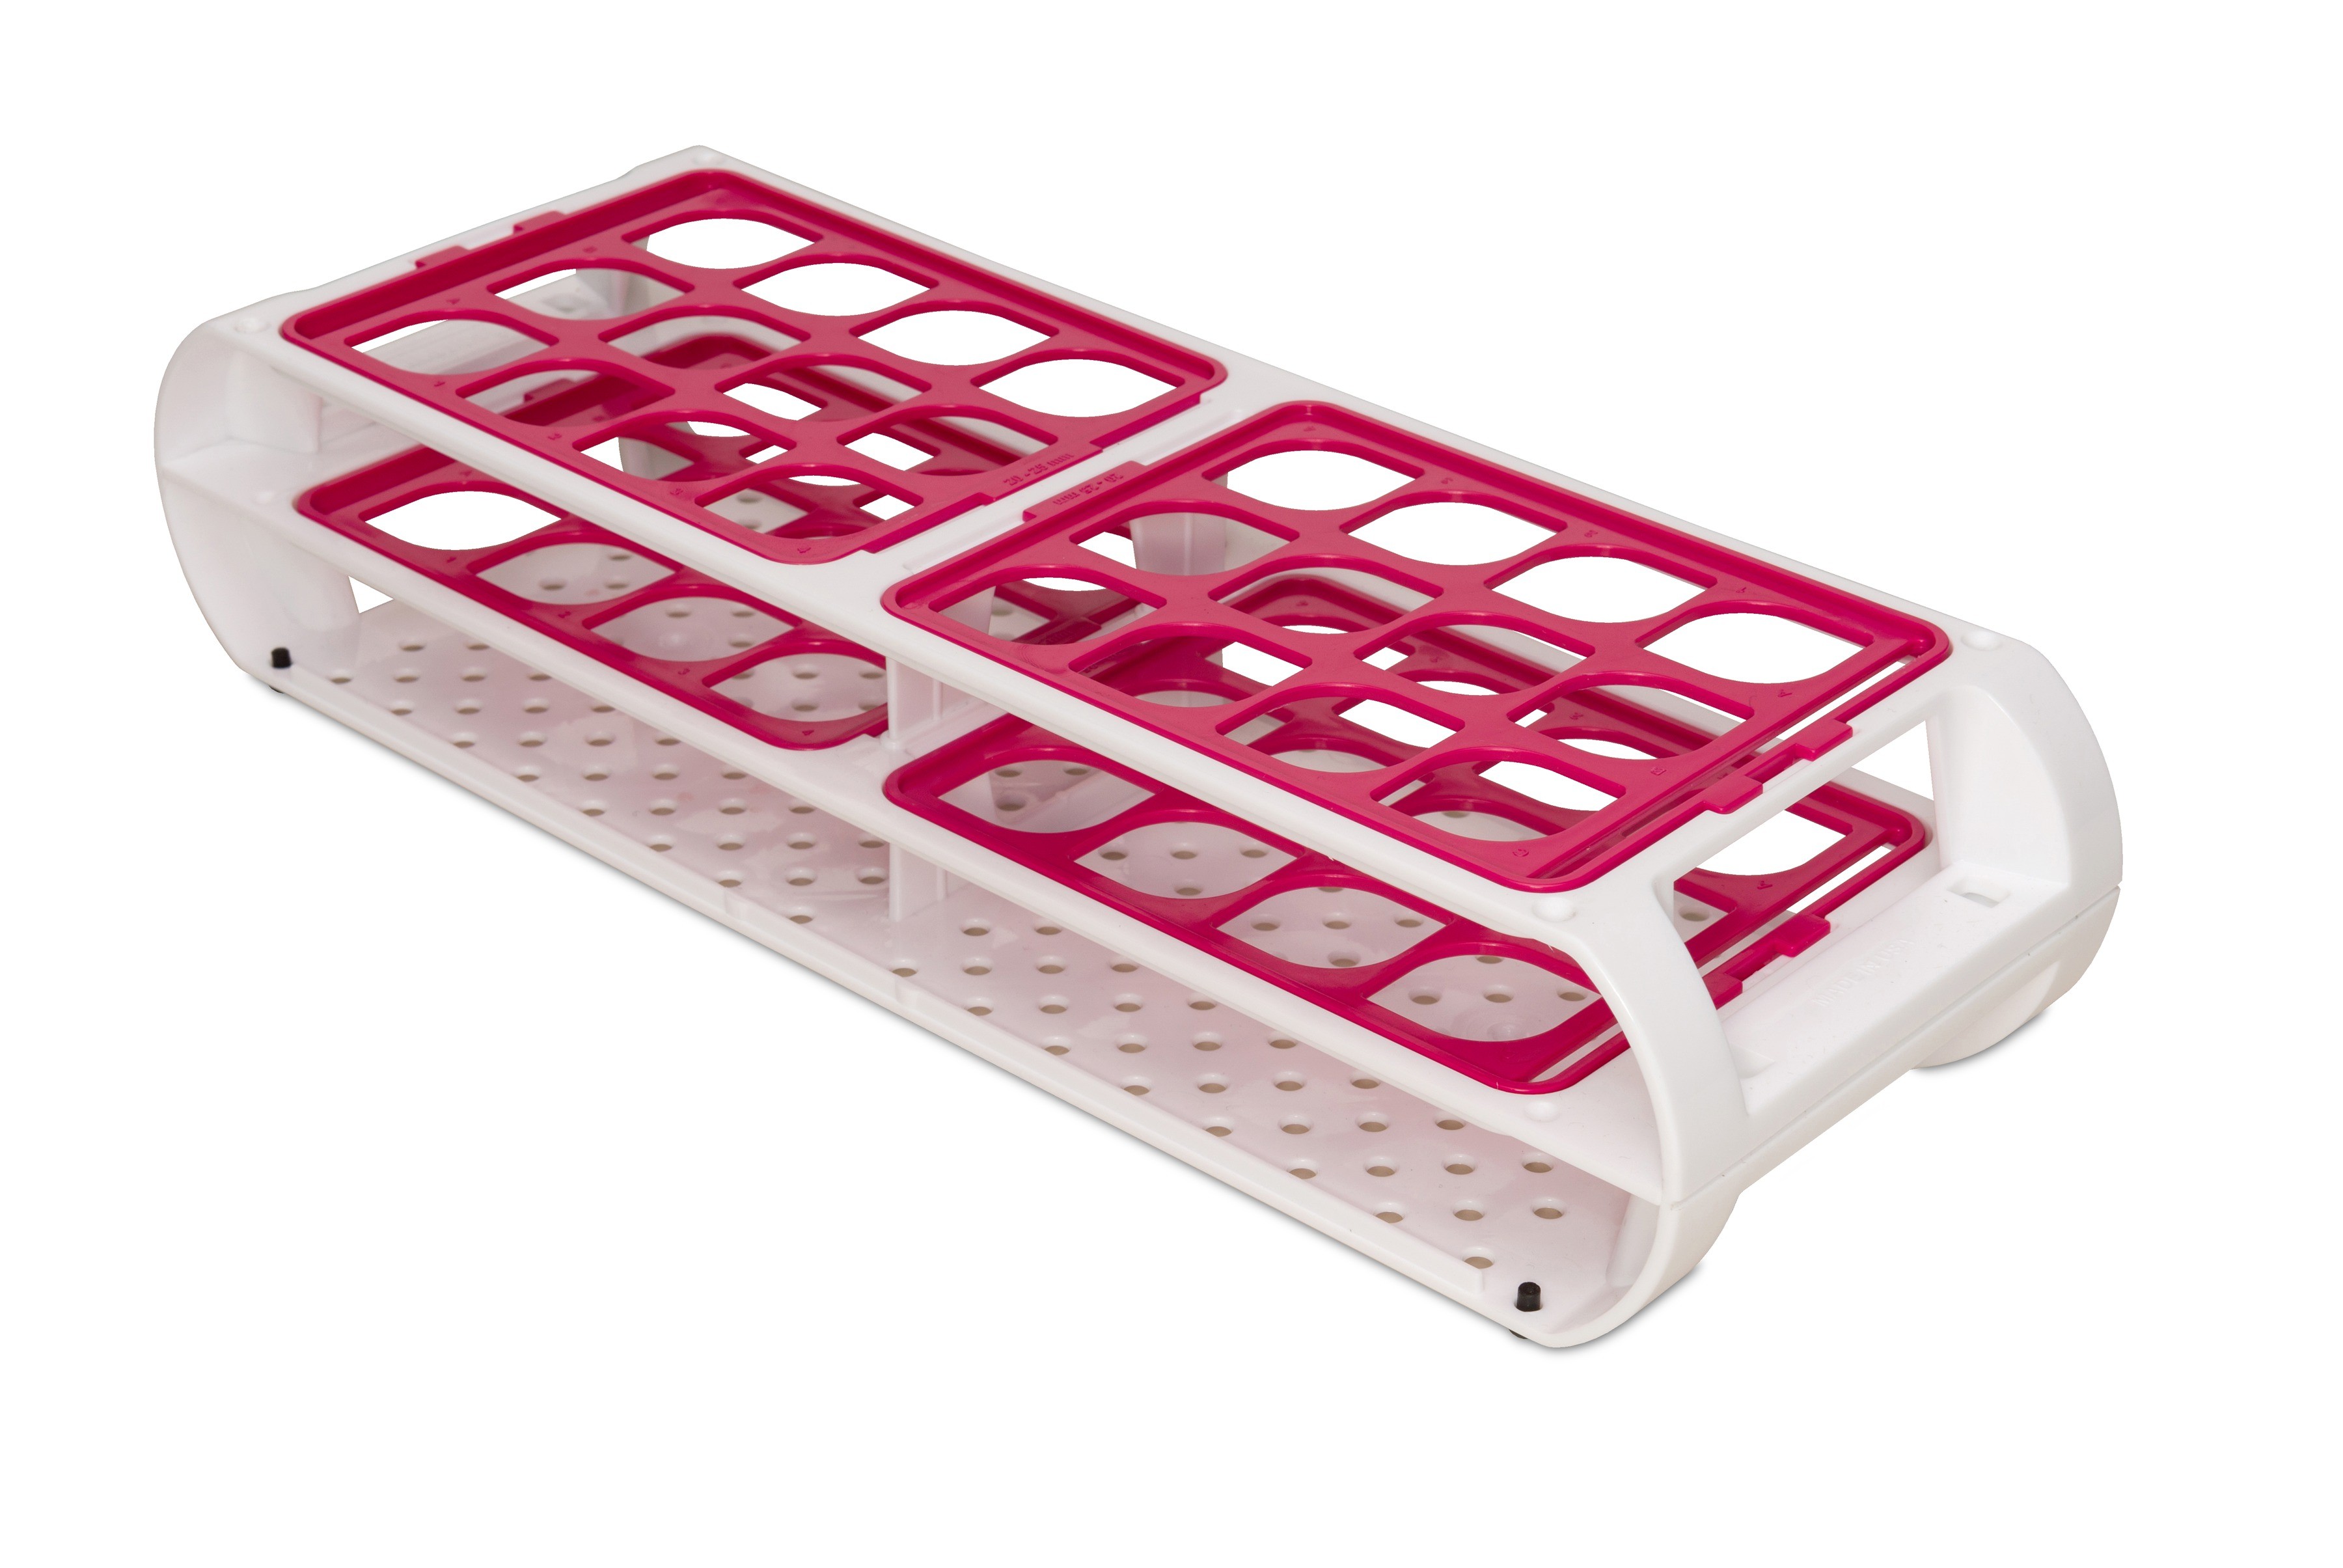 SP Bel-Art Switch-Grid Test Tube Rack; 24 Places, For 20-25mm Tubes, Fuchsia